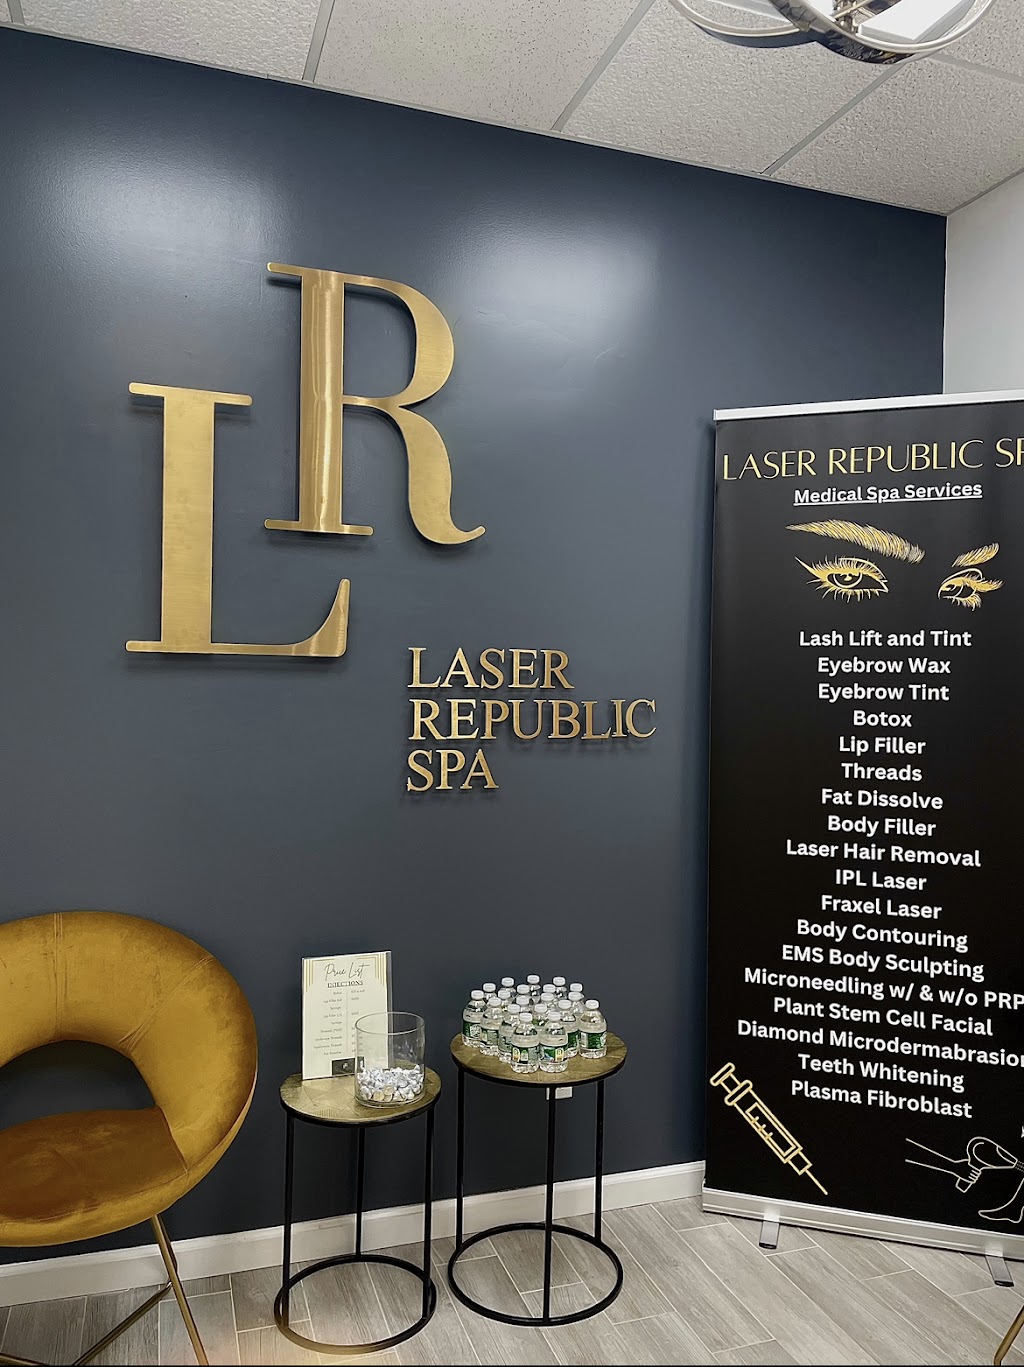 Laser Republic Spa | 822 NY-82 suite 340, Hopewell Junction, NY 12533 | Phone: (845) 444-2154